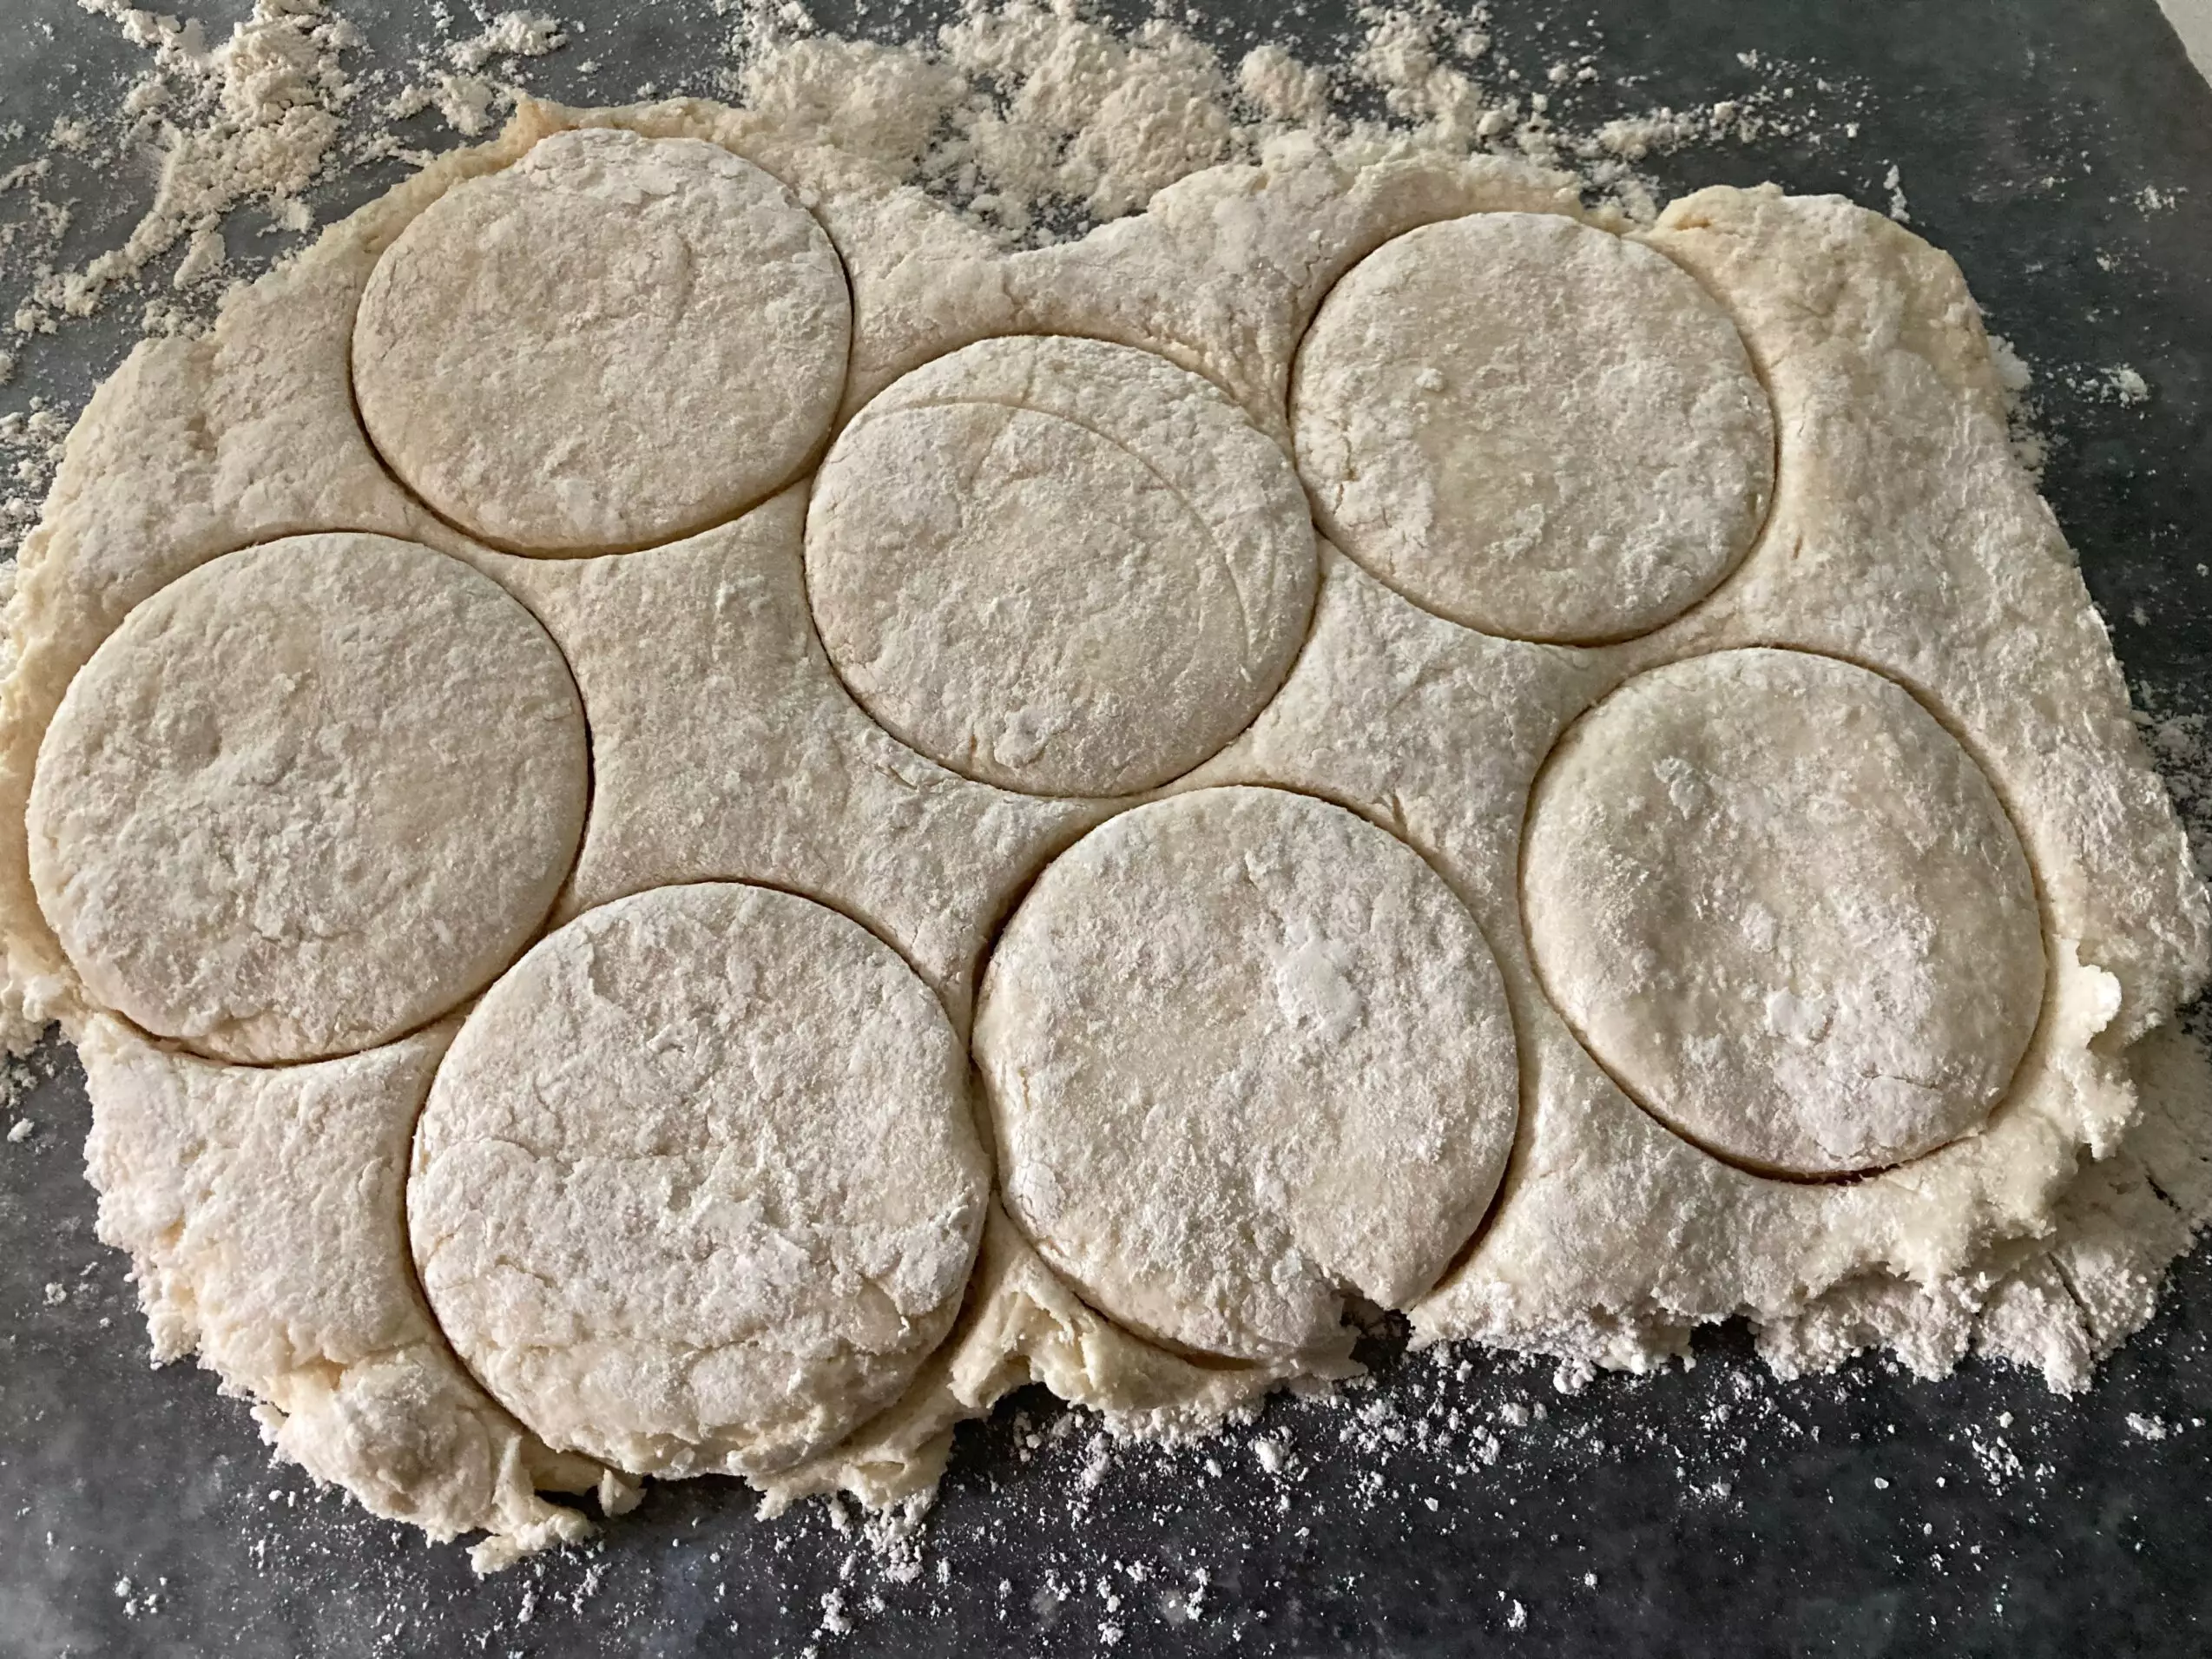 Baking Powder Biscuits from Out of the Box Baking.com